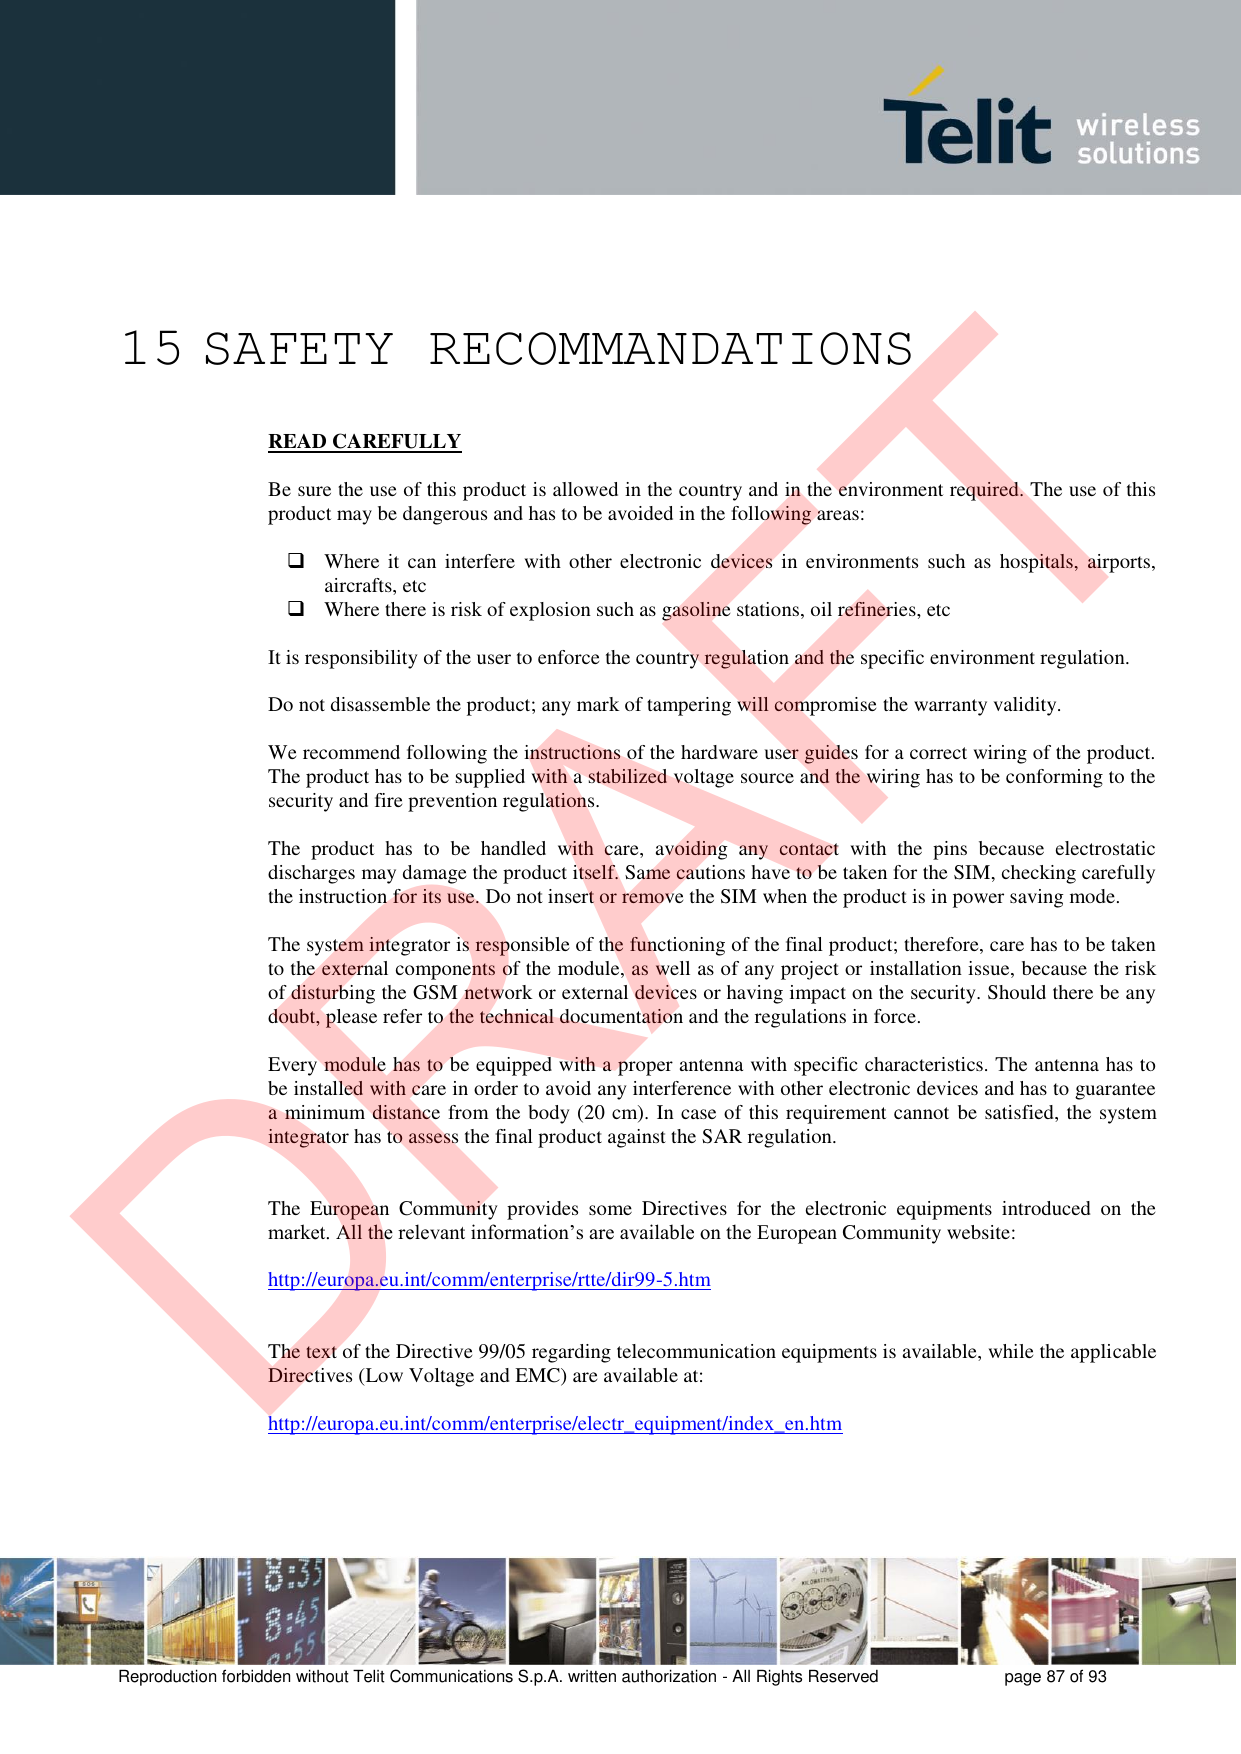 Reproduction forbidden without Telit Communications S.p.A. written authorization - All Rights Reserved  page 87 of 93 15 SAFETY RECOMMANDATIONS READ CAREFULLY Be sure the use of this product is allowed in the country and in the environment required. The use of this product may be dangerous and has to be avoided in the following areas: Where  it  can  interfere  with other  electronic devices in  environments  such as  hospitals,  airports,aircrafts, etcWhere there is risk of explosion such as gasoline stations, oil refineries, etcIt is responsibility of the user to enforce the country regulation and the specific environment regulation. Do not disassemble the product; any mark of tampering will compromise the warranty validity. We recommend following the instructions of the hardware user guides for a correct wiring of the product. The product has to be supplied with a stabilized voltage source and the wiring has to be conforming to the security and fire prevention regulations. The  product  has  to  be  handled  with  care,  avoiding  any  contact  with  the  pins  because  electrostatic discharges may damage the product itself. Same cautions have to be taken for the SIM, checking carefully the instruction for its use. Do not insert or remove the SIM when the product is in power saving mode. The system integrator is responsible of the functioning of the final product; therefore, care has to be taken to the external components of the module, as well as of any project or installation issue, because the risk of disturbing the GSM network or external devices or having impact on the security. Should there be any doubt, please refer to the technical documentation and the regulations in force. Every module has to be equipped with a proper antenna with specific characteristics. The antenna has to be installed with care in order to avoid any interference with other electronic devices and has to guarantee a minimum distance from the body (20 cm). In case of this requirement cannot be satisfied, the system integrator has to assess the final product against the SAR regulation. The  European  Community  provides  some  Directives  for  the  electronic  equipments  introduced  on  the market. All the relevant information’s are available on the European Community website: http://europa.eu.int/comm/enterprise/rtte/dir99-5.htm The text of the Directive 99/05 regarding telecommunication equipments is available, while the applicable Directives (Low Voltage and EMC) are available at: http://europa.eu.int/comm/enterprise/electr_equipment/index_en.htm DRAFT